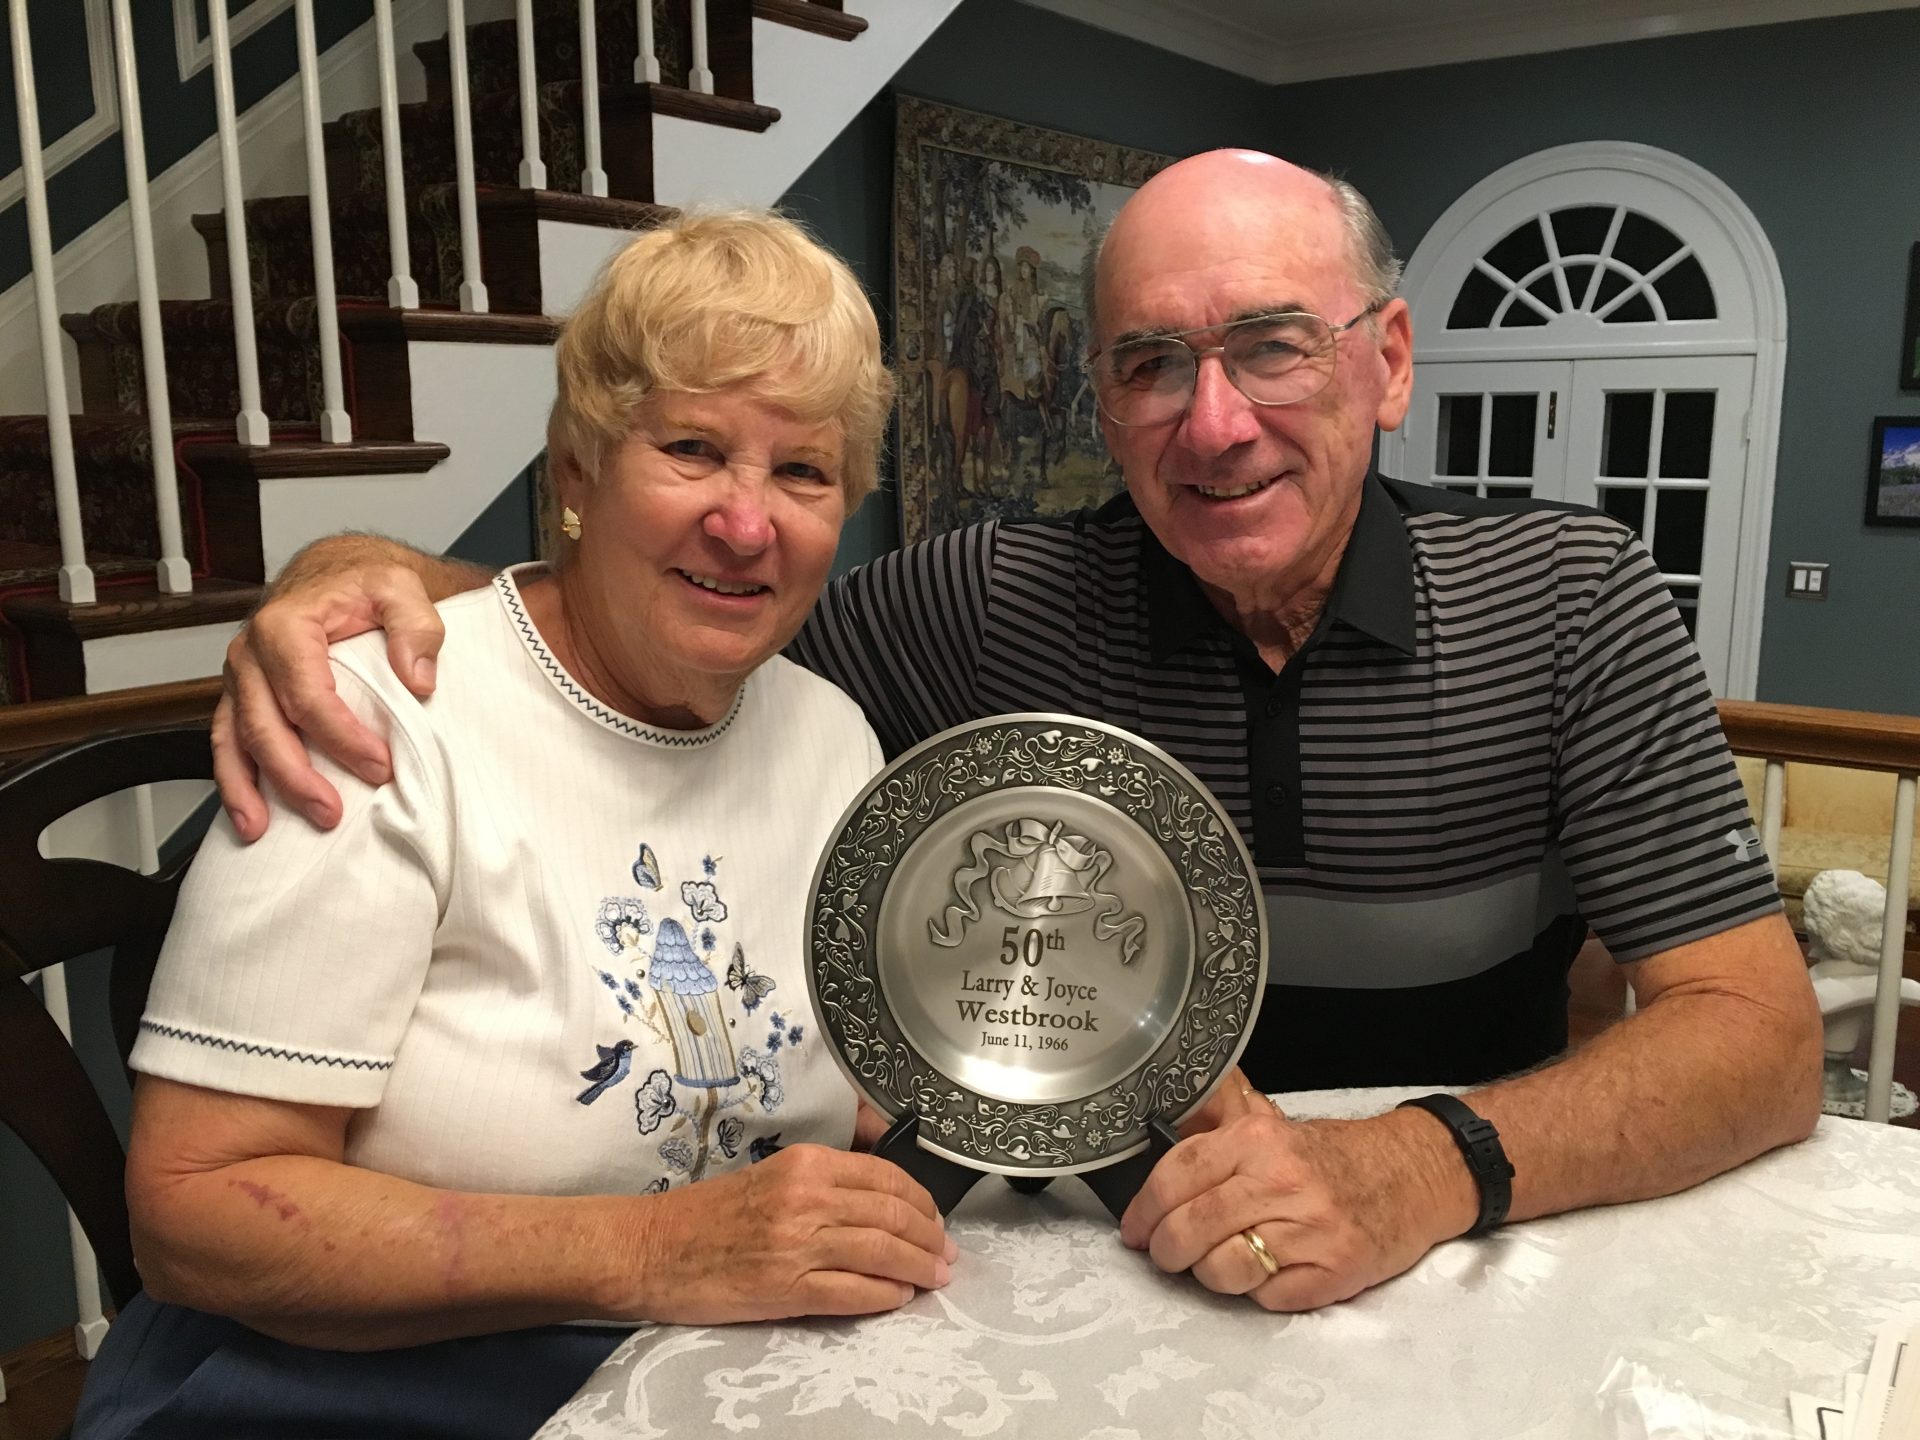 Larry and Joyce celebrating 50 years of marriage